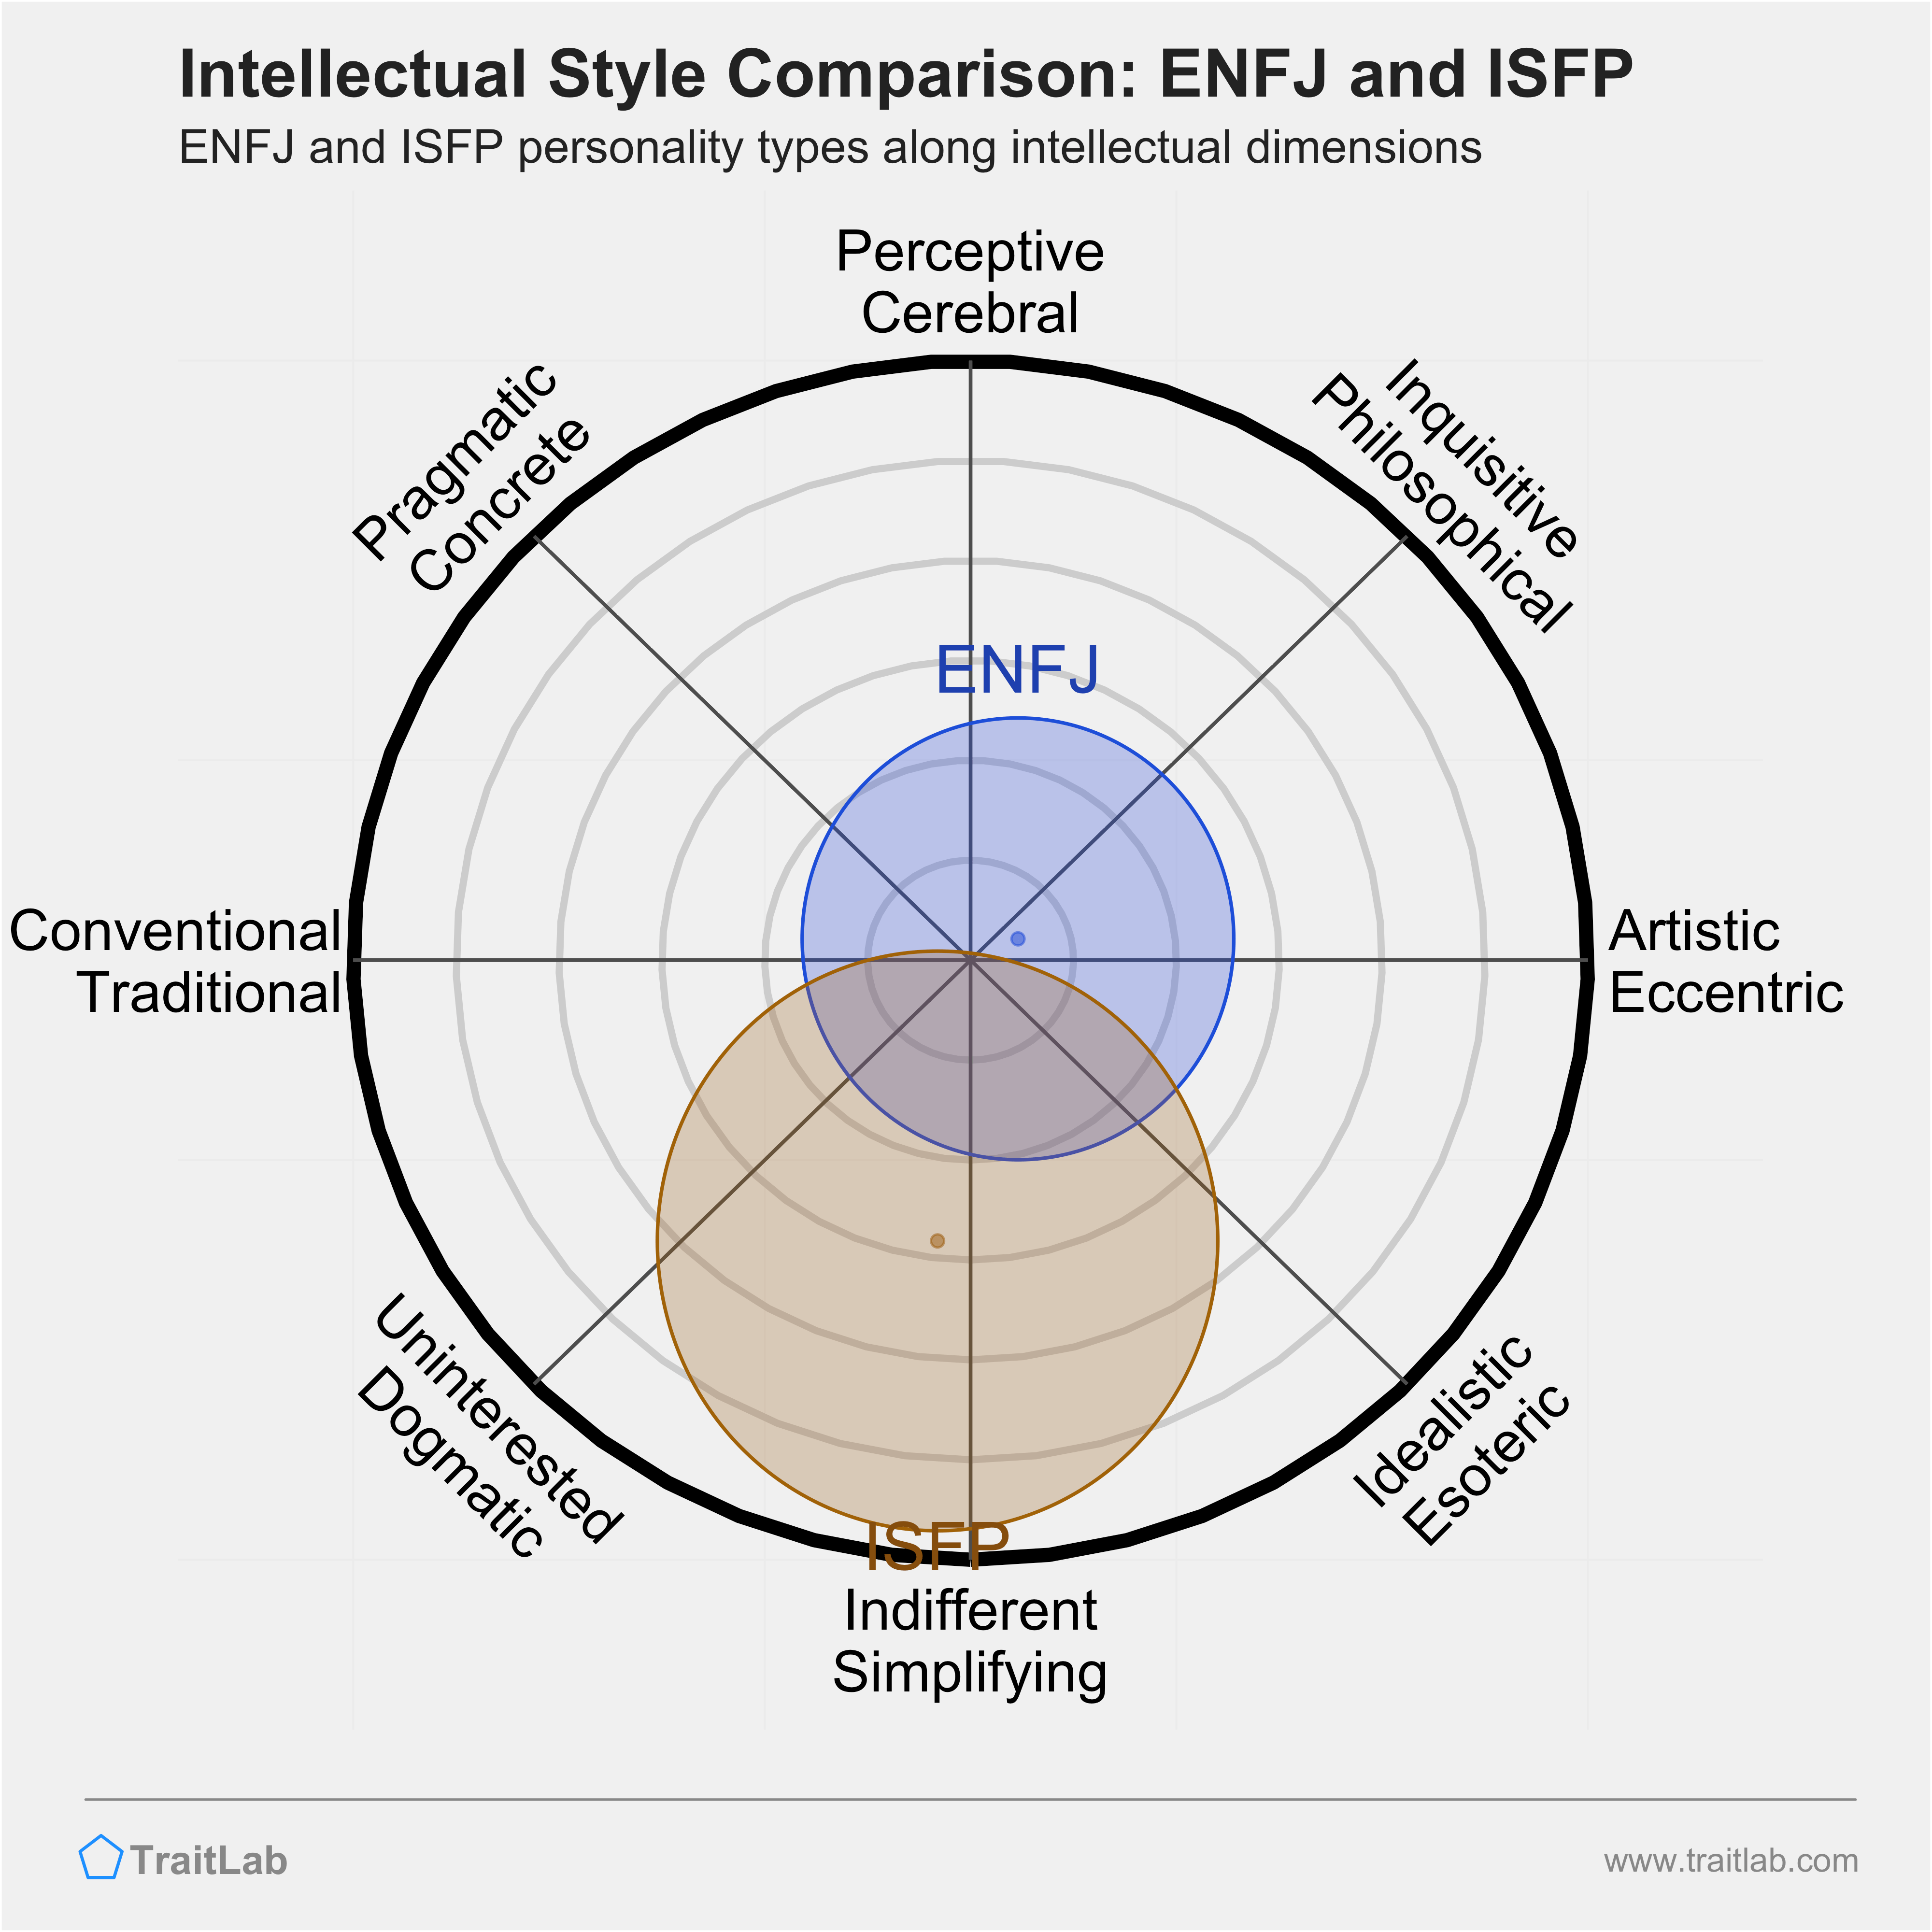 ENFJ and ISFP comparison across intellectual dimensions